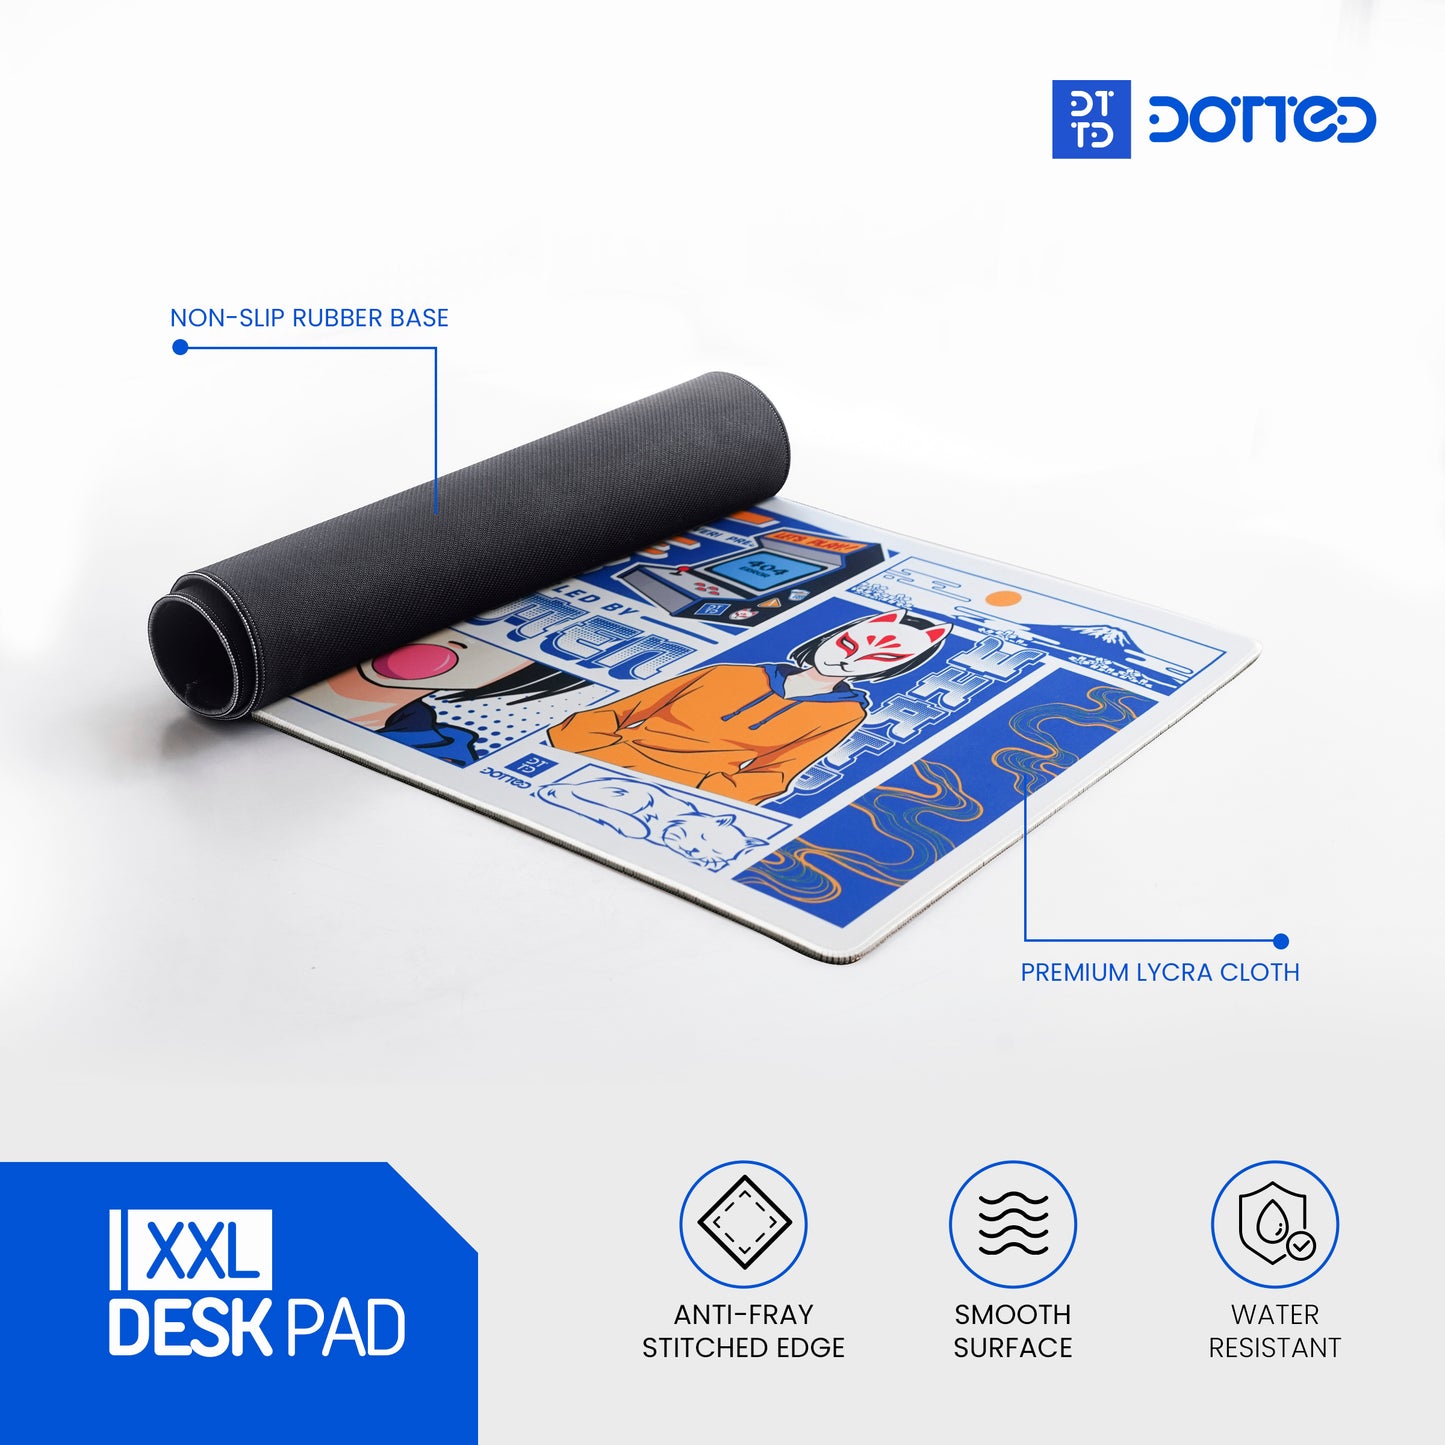 DOTTED Azure Limited Edition Deskpad